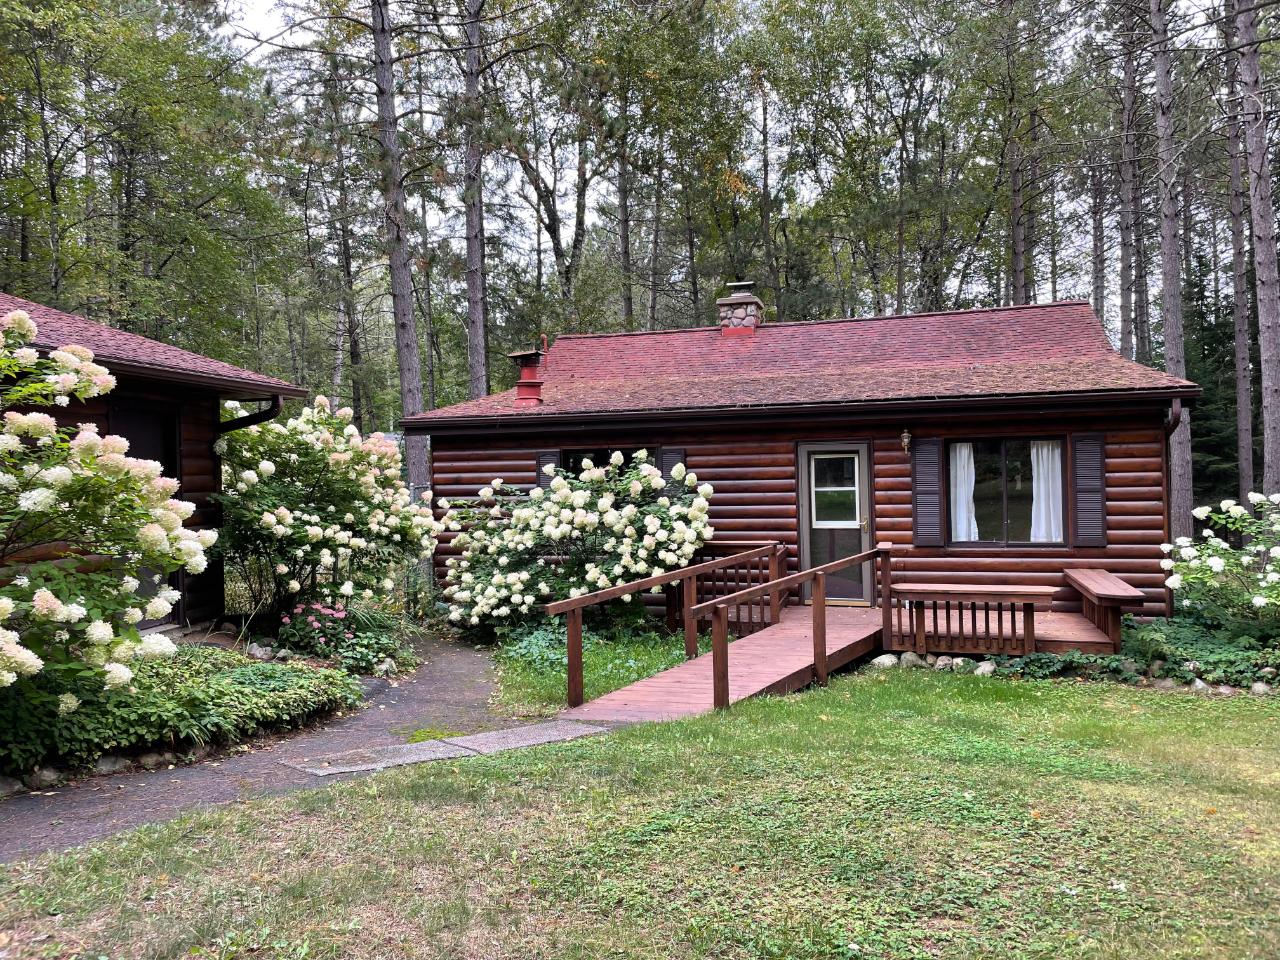 Don’t miss this 3 for 1 special! Nestled on the quiet bay of Rest Lake lies a quaint year-round cabin on 3 beautiful, wooded lots. This 2 BR 1 BA cabin is sure to turn into your favorite seasonal getaway or a quiet residence to permanently relocate to. A gorgeous lake view can be seen from the open concept living & dining room or w/a wintertime fire warming as you stare out at the sparkling snow. Sit back with a book & your favorite beverage in the “she shed” and enjoy not only the lake view, but the abundance of wildlife that cross through the yard! The home features a detached garage next to the home as well as a large pole barn garage for your toys including the pontoon boat & snowmobile that are being sold with the home! A small boat cruise around the corner leads you to the beautiful MW chain. The bike trail goes right across your driveway connecting you to the entire paved bike trail system of Vilas County. Must see to appreciate! Pole Building 30'x38' "She Shed" 14'x10'